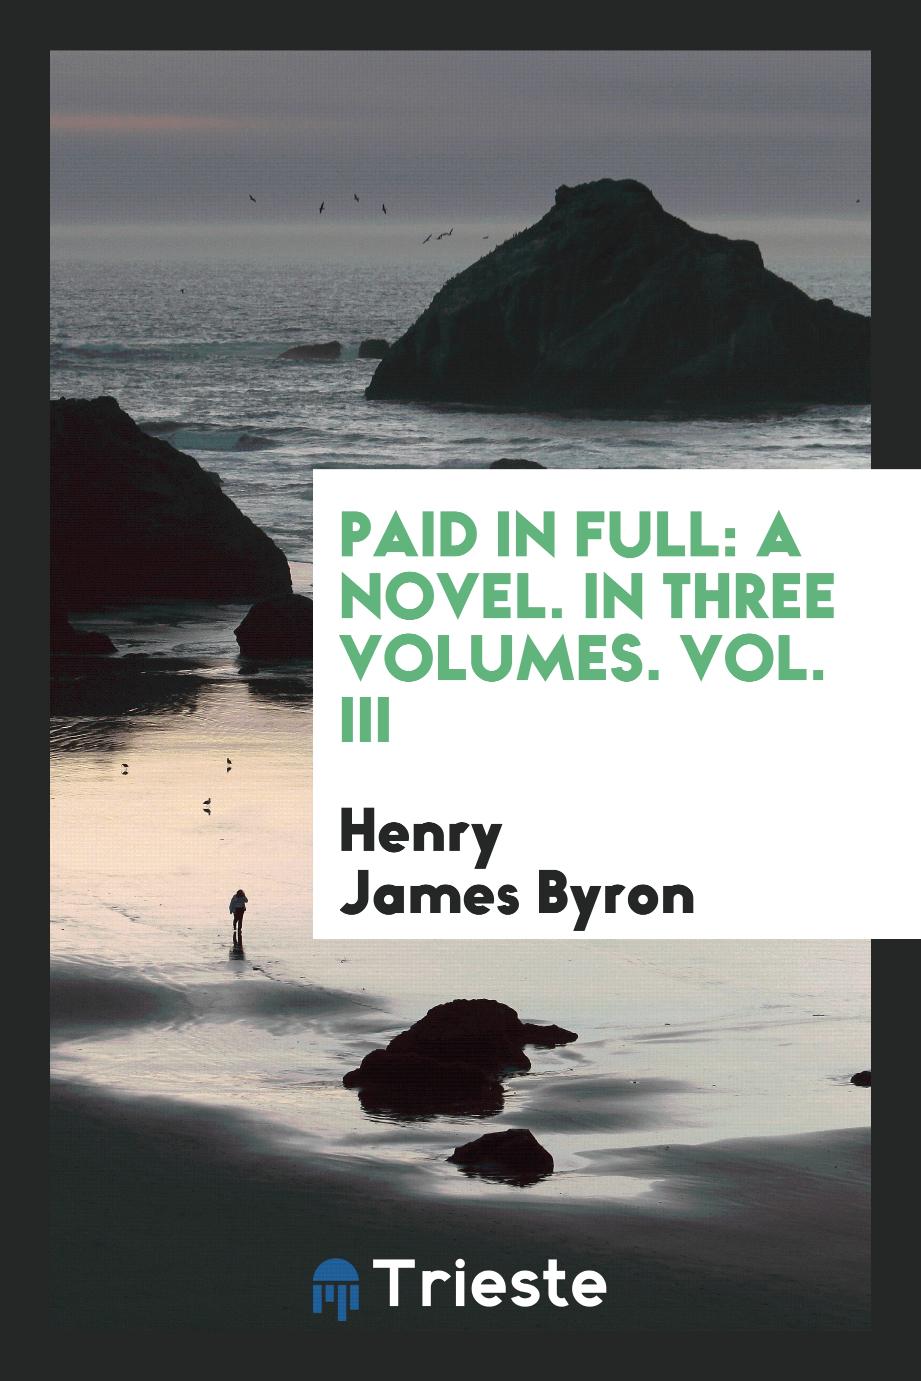 Paid in full: a novel. In Three Volumes. Vol. III